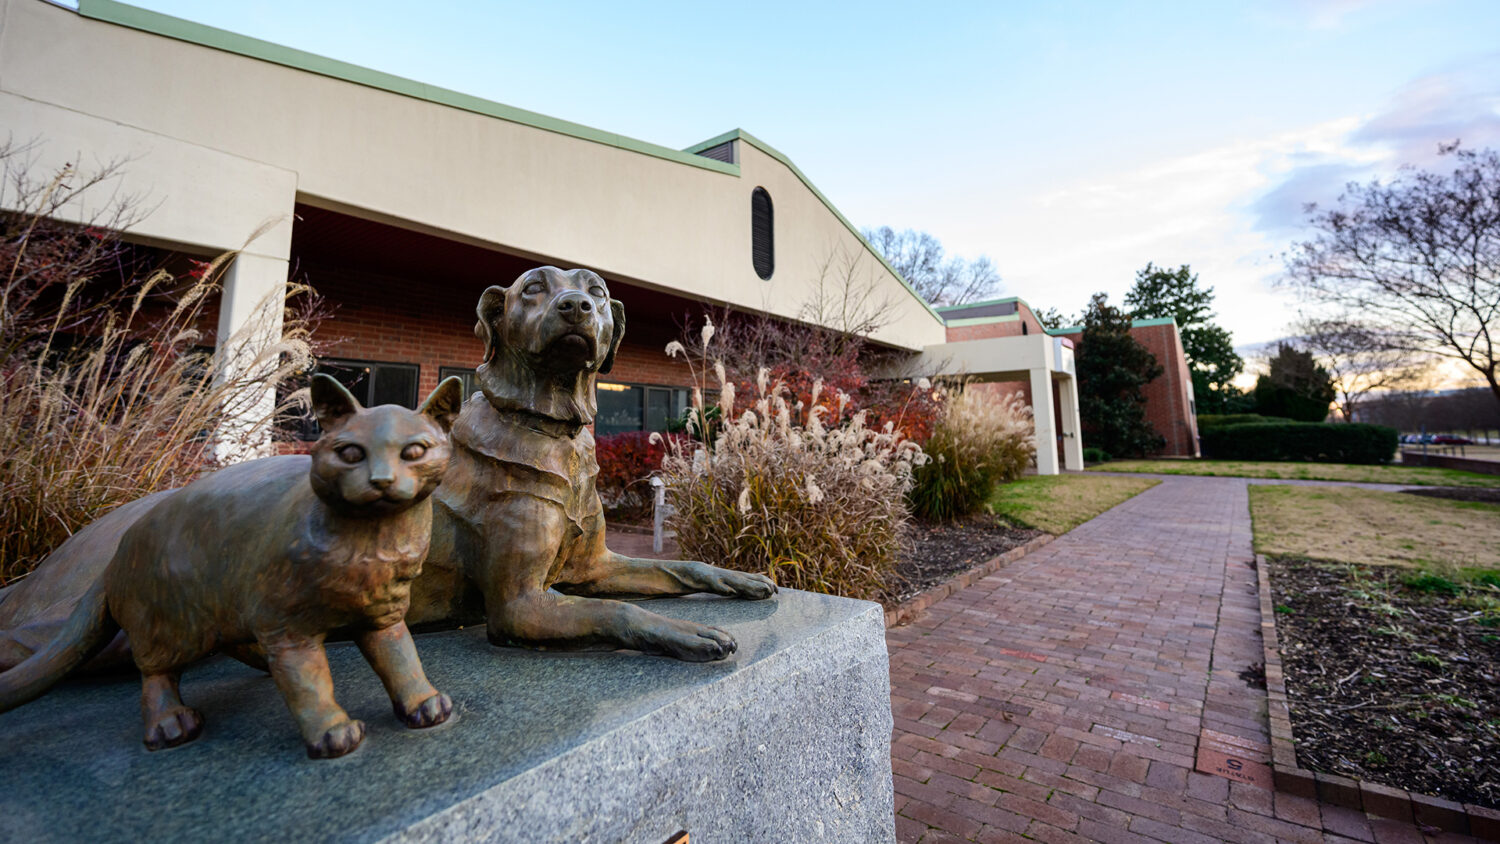 Outside the buildings of CVM, a statue of a cat and dog welcomes visitors.